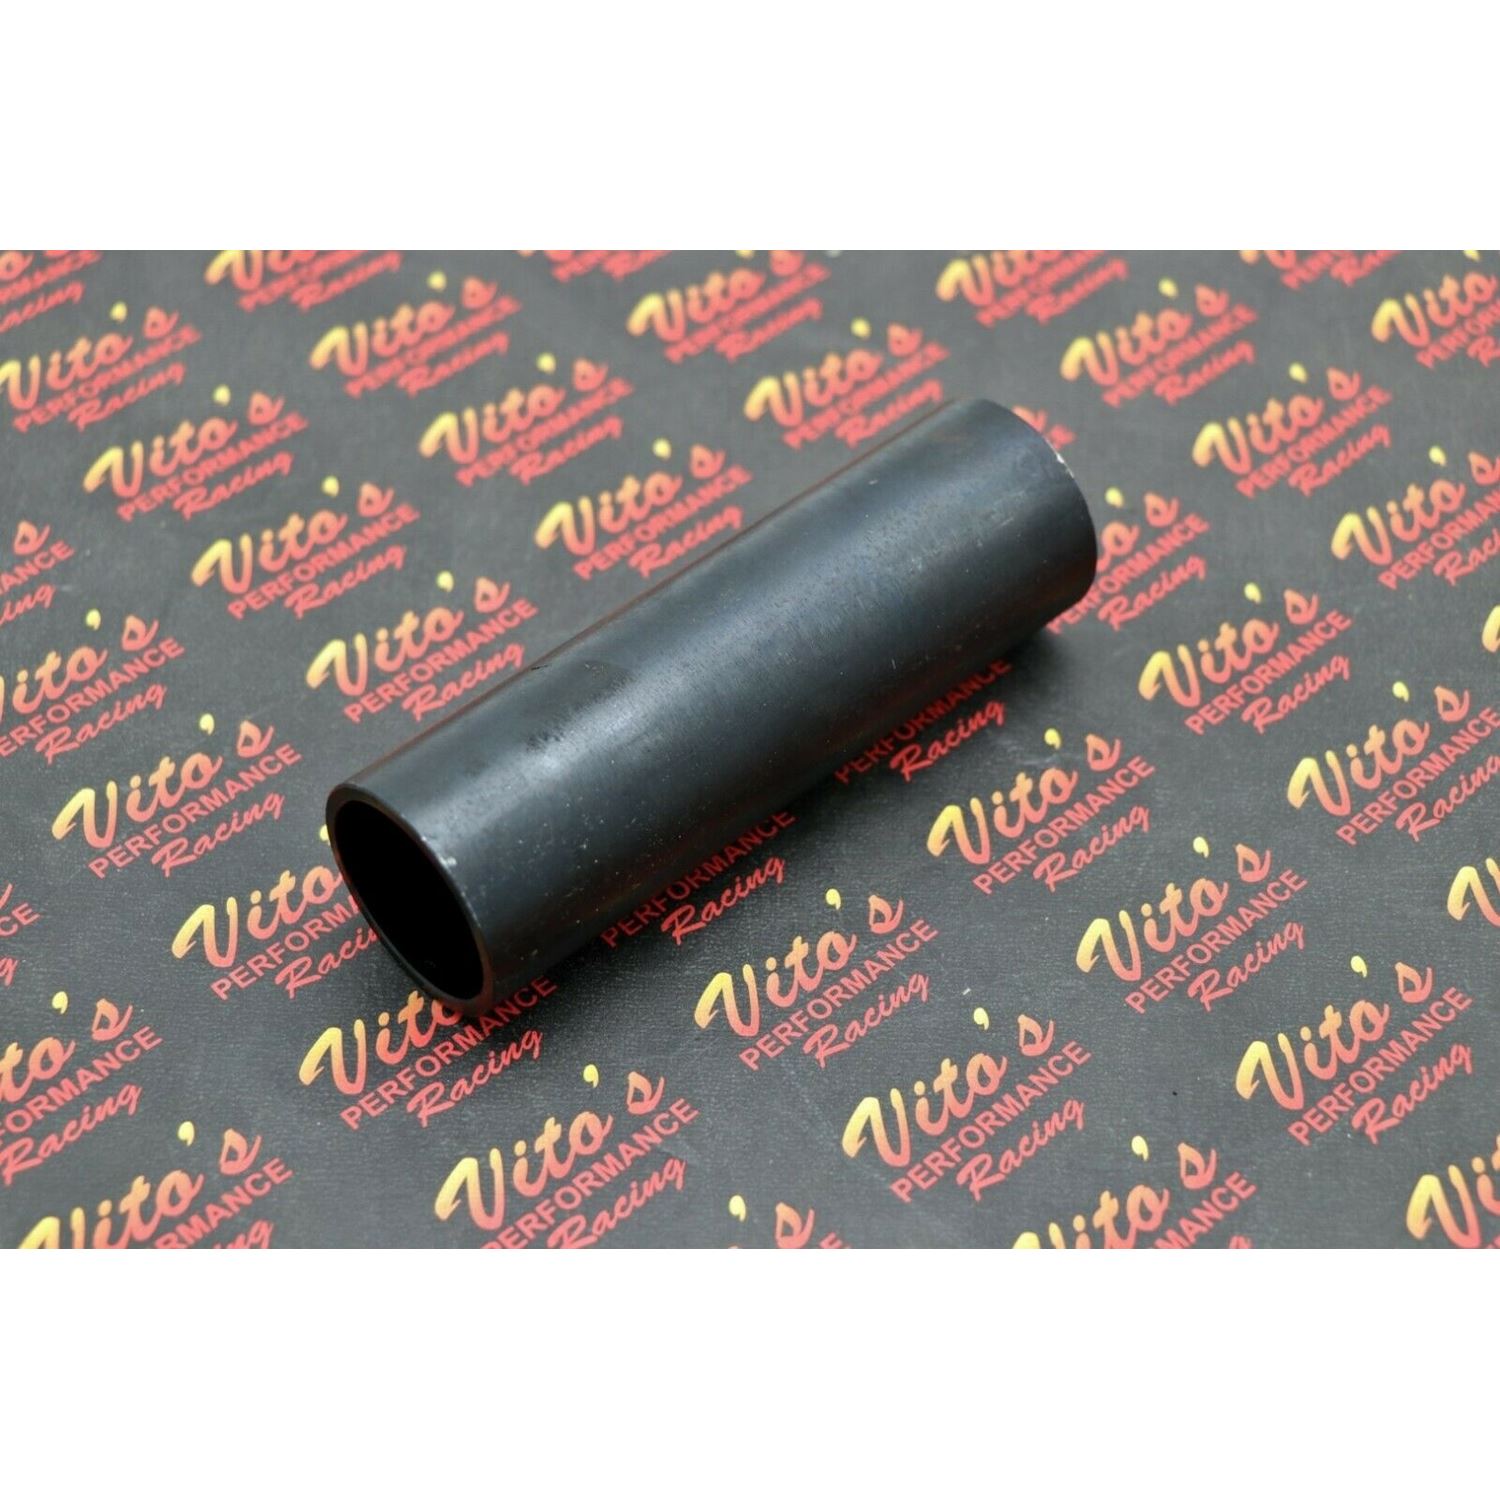 Vitos Performance NEW rear axle CARRIER spacer tub